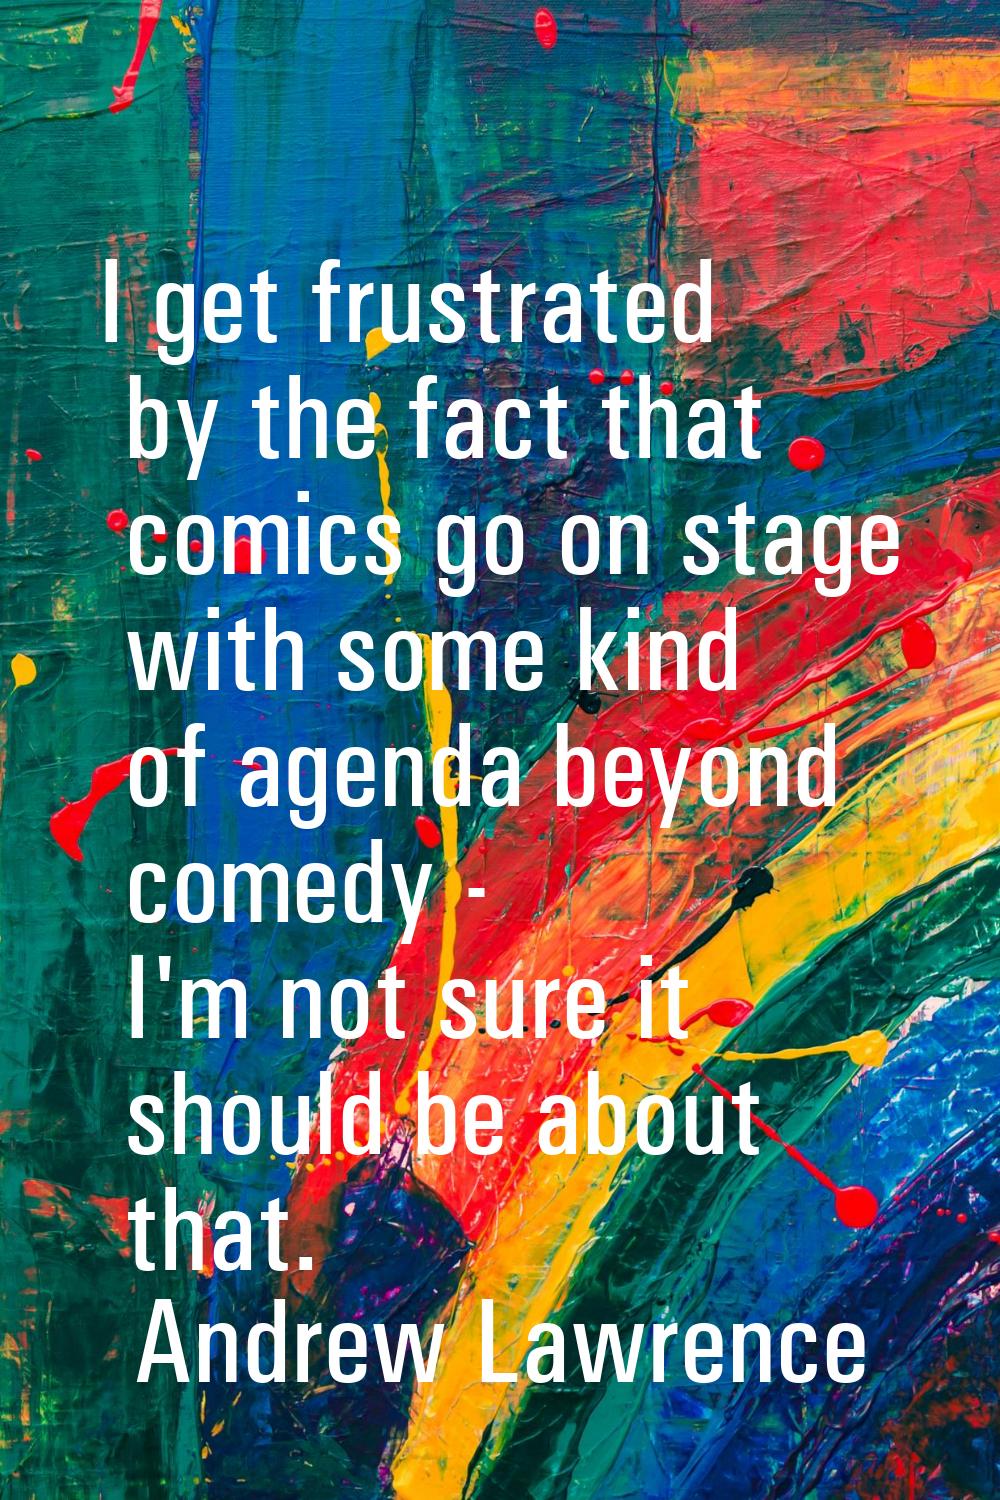 I get frustrated by the fact that comics go on stage with some kind of agenda beyond comedy - I'm n